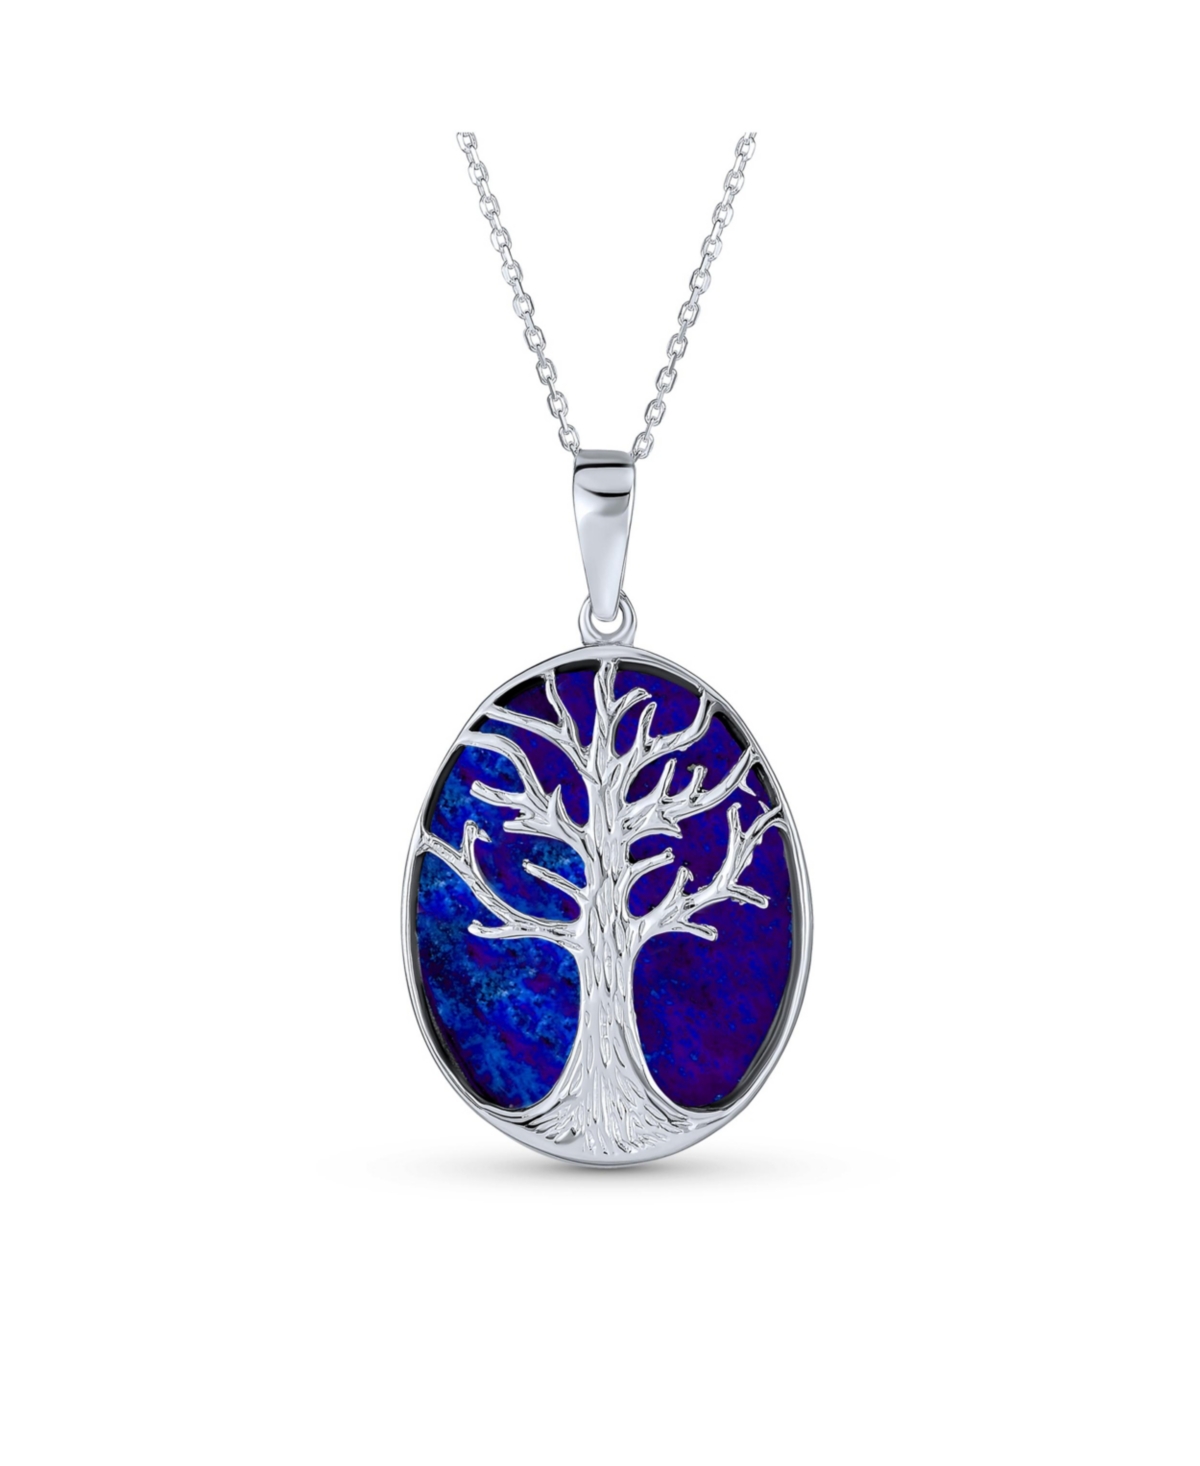 Blue Lapis Lazuli large Oval Wishing Tree Family Tree Of Life Pendant Necklace Western Jewelry For Women .925 Sterling Silver - Blue